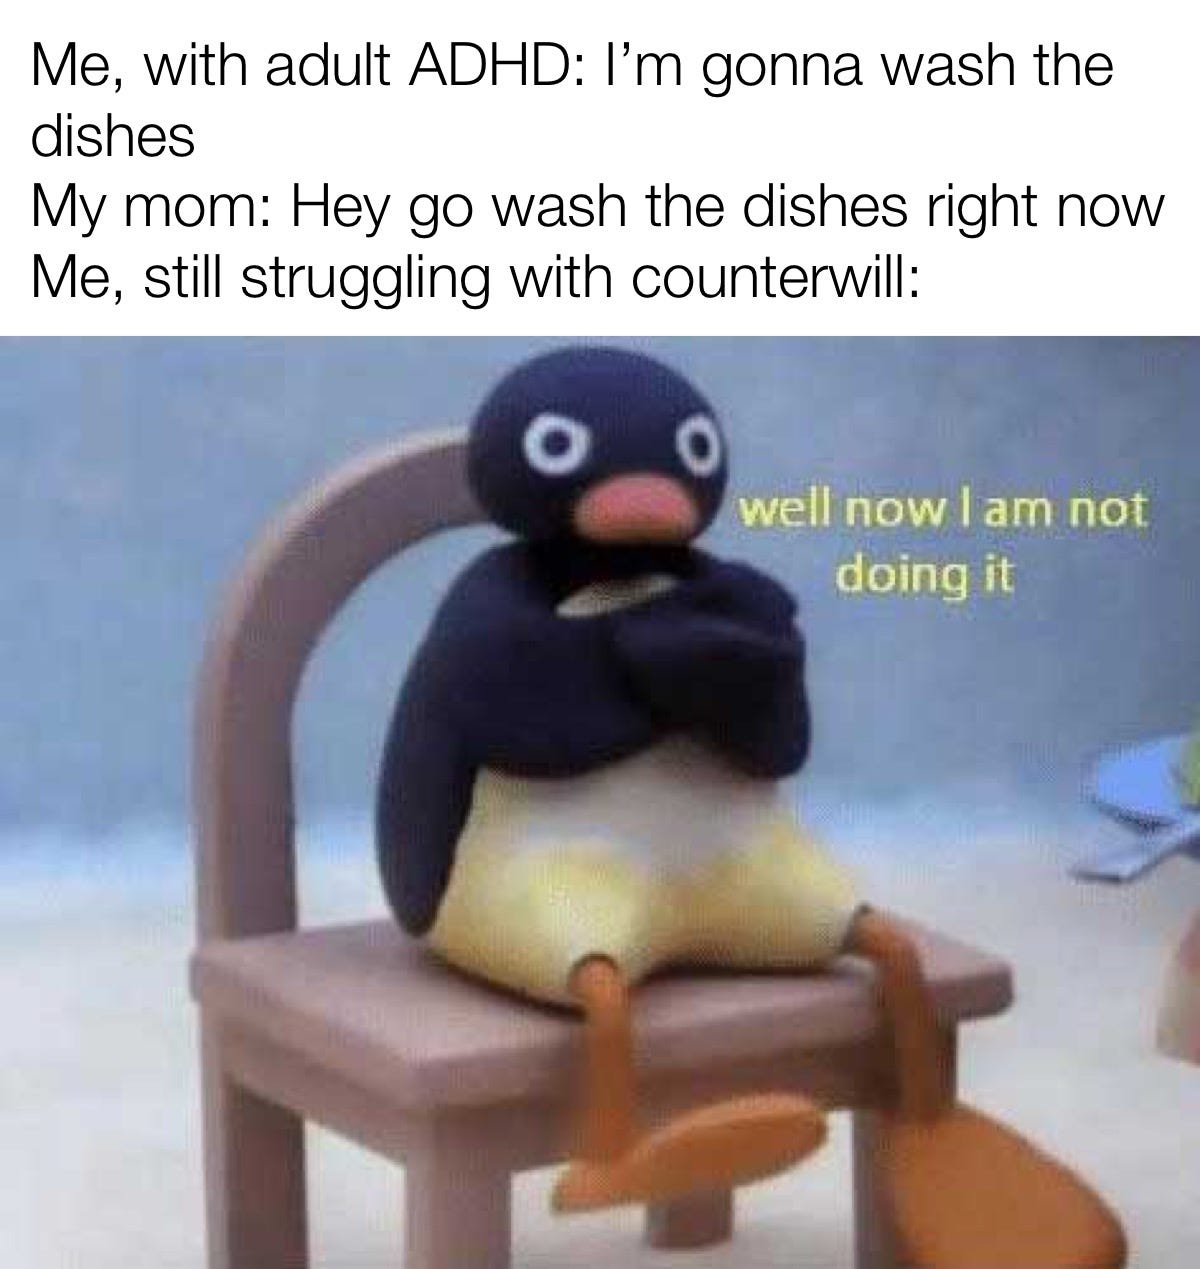 Me, with adult ADHD: I'm gonna wash the dishes. My mom: Hey go wash the dishes right now. Me, still struggling with counterwill: well now l am not doing it.